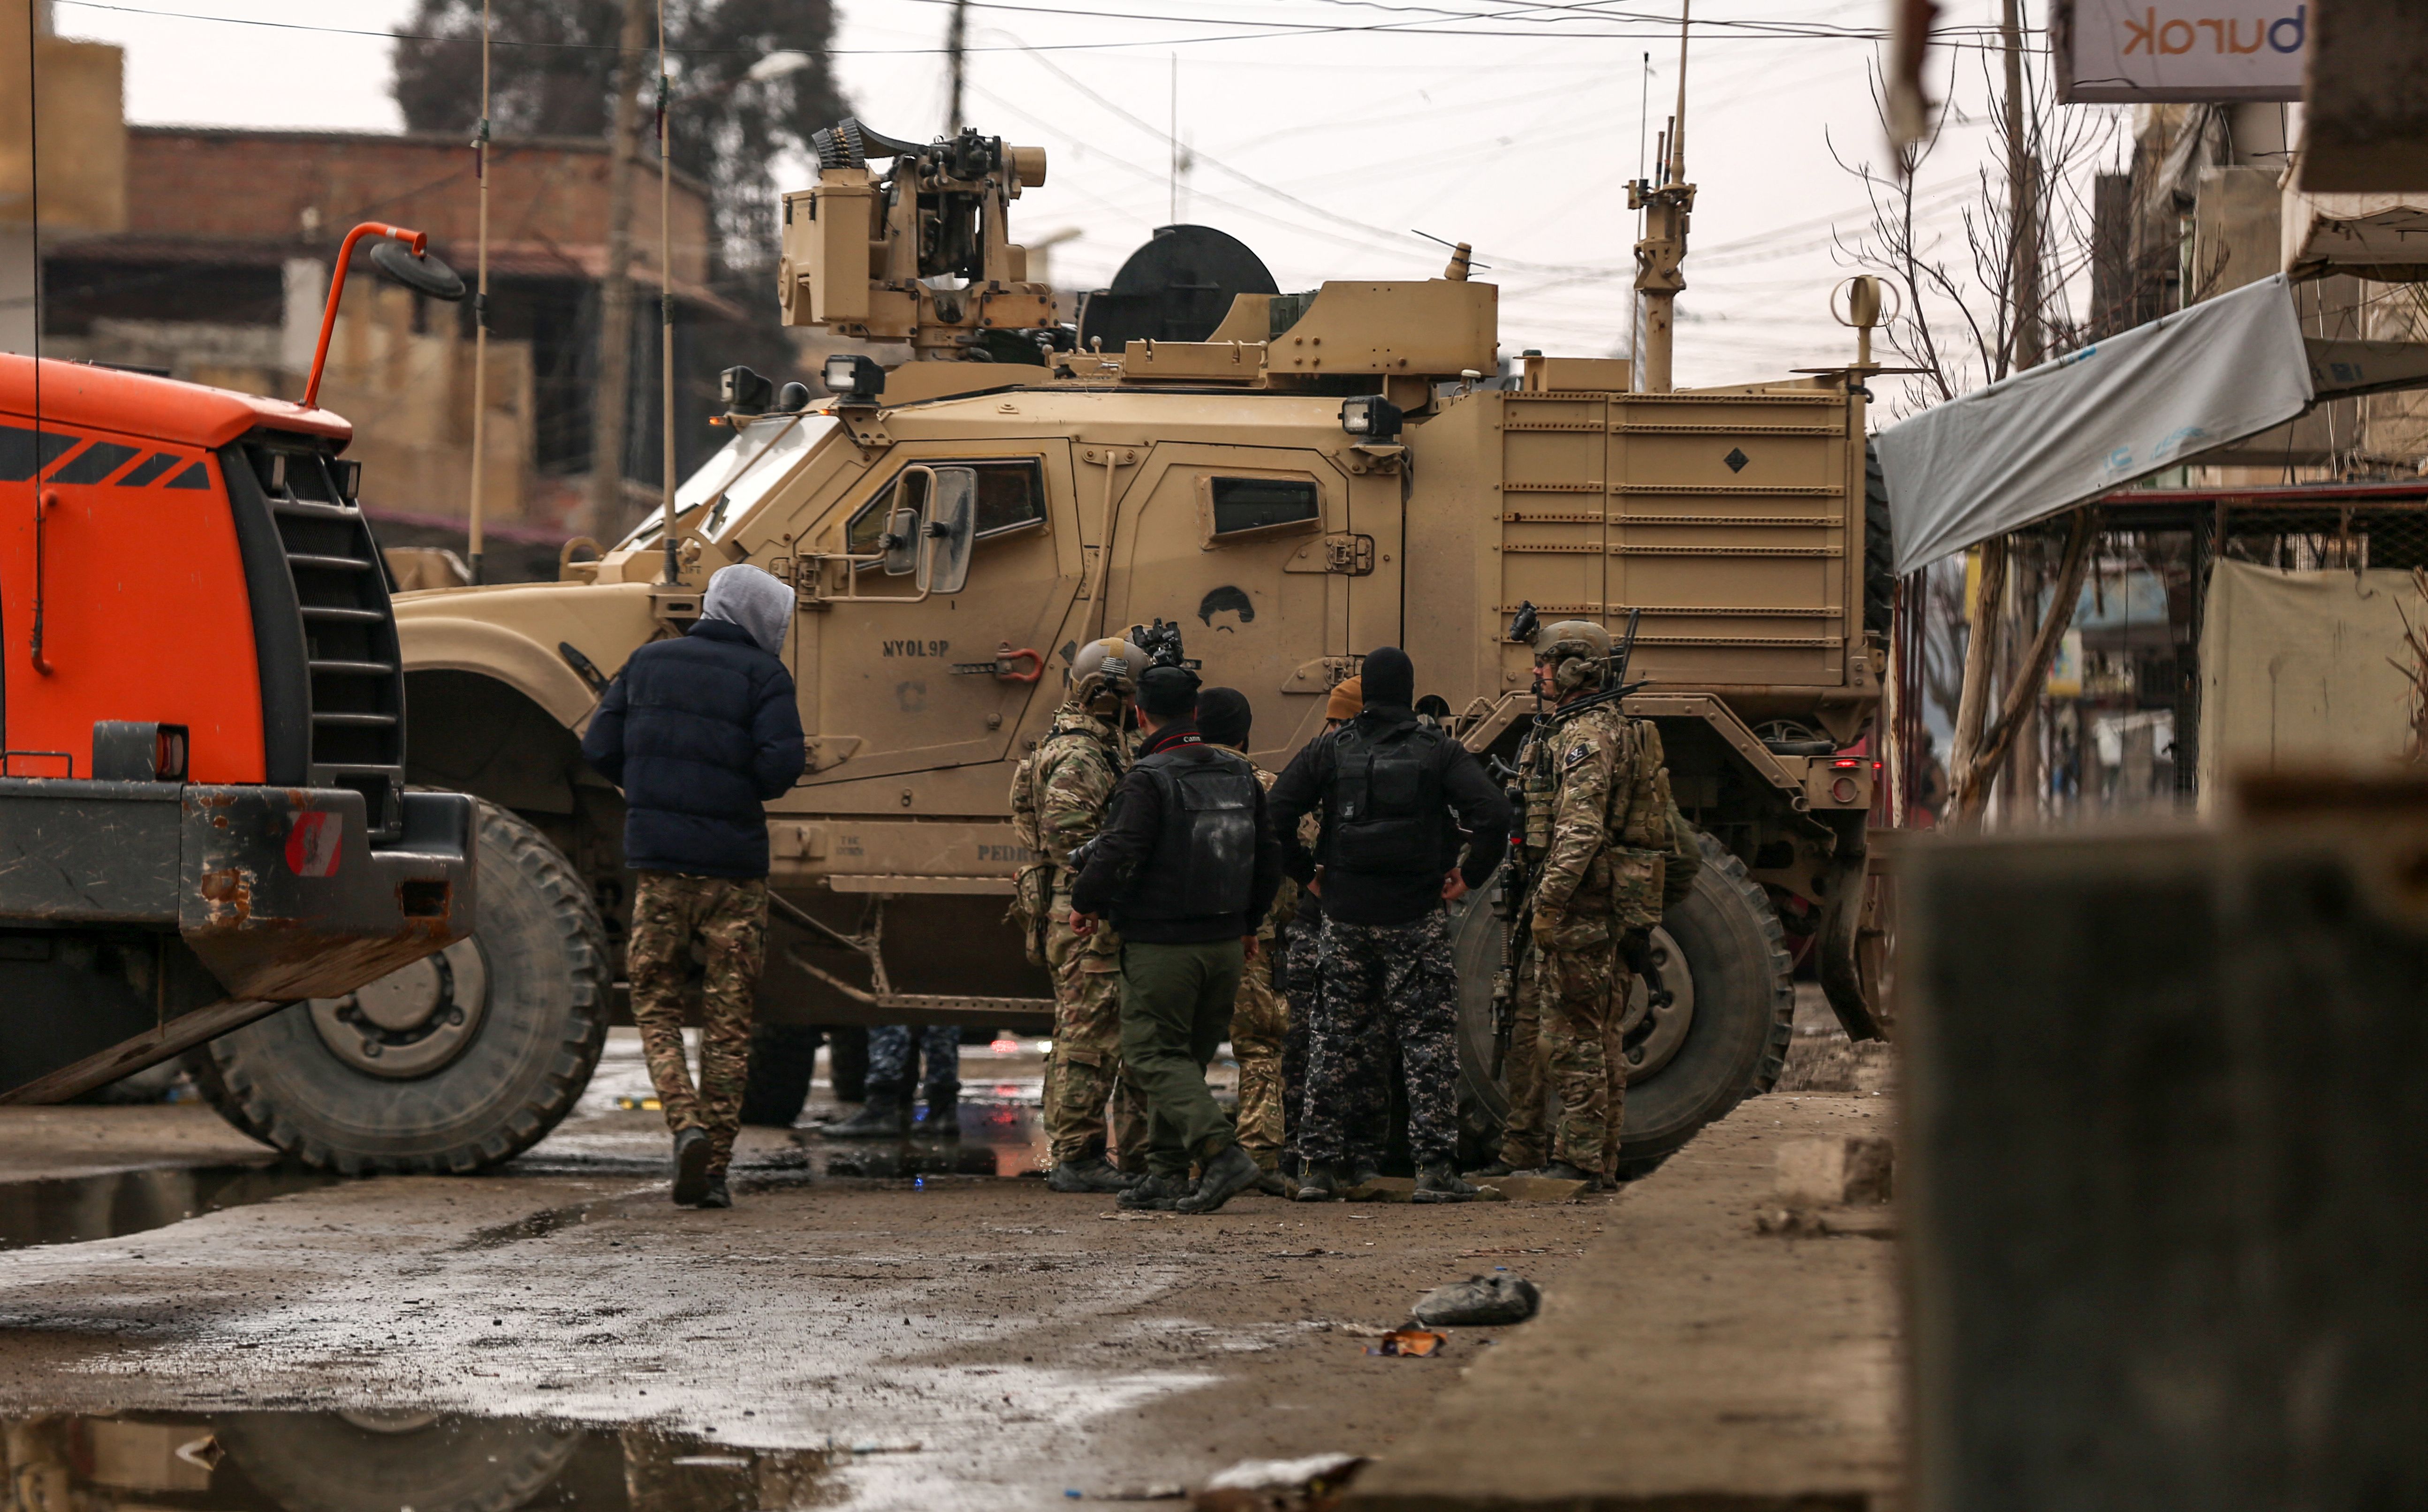 US soldiers accompanied by members of the Syrian Democratic Forces (SDF) gather in the neighbourhood of Ghwayran in the northeastern Syrian city of Hasakeh, on January 29, as they search for prisoners believed to be affiliated with the Islamic State (IS) group, who had escaped from the Kurdish-held Sinaa prison (also known as Ghwayran prison) during an IS attack.